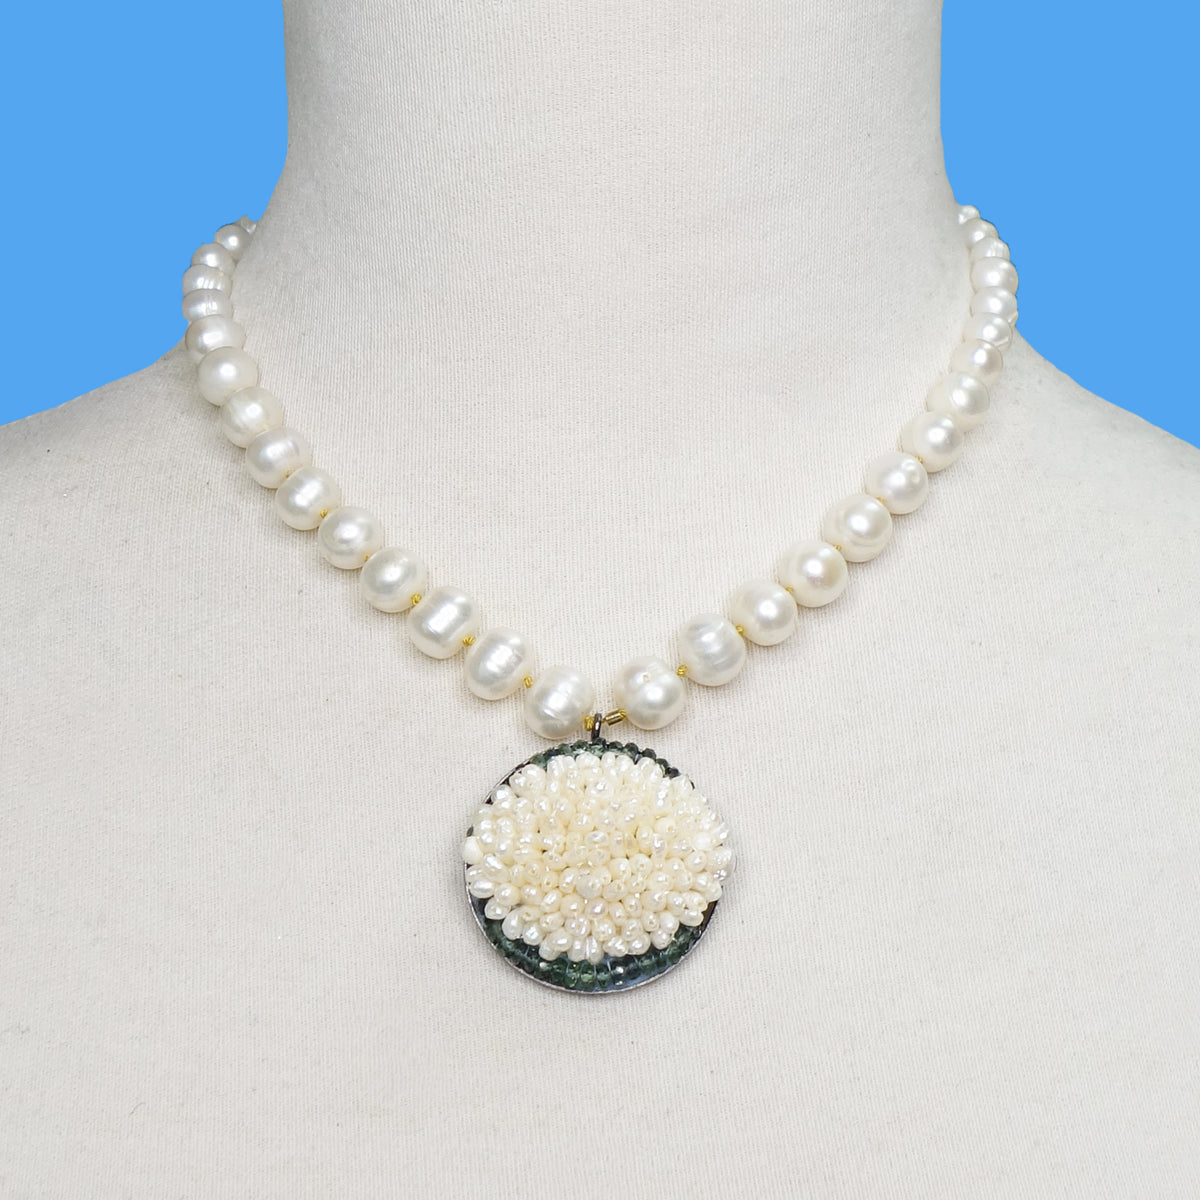 Spectacular Pearls: sapphire mosaic necklace